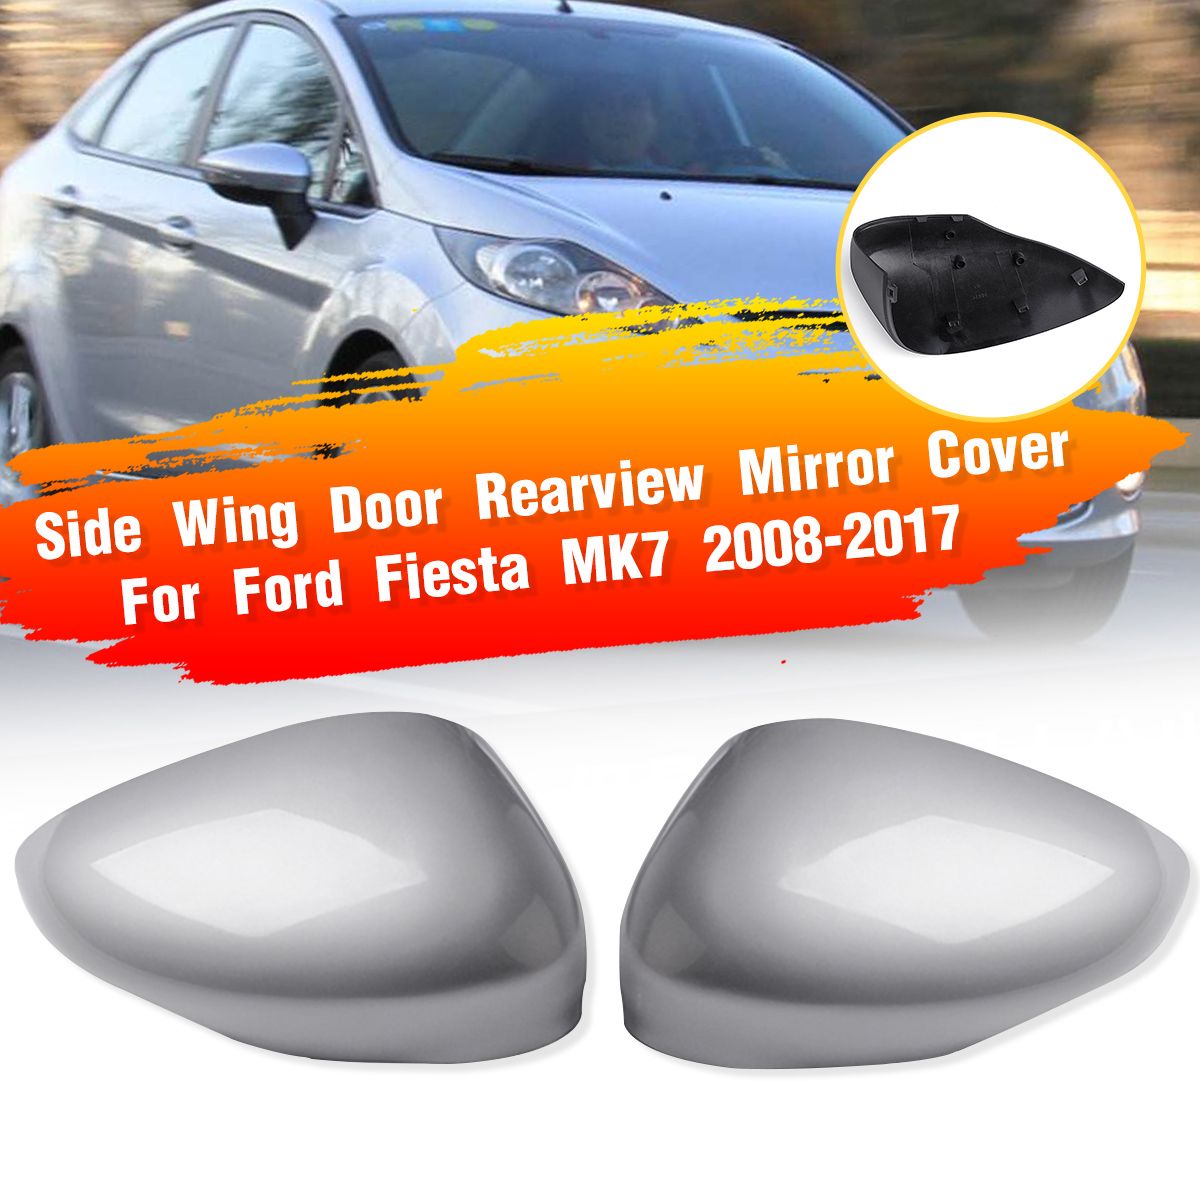 LeftRight-Side-Door-Wing-Rearview-Mirror-Cover-Cap-Silver-For-Ford-Fiesta-MK7-2008-2017-1717056